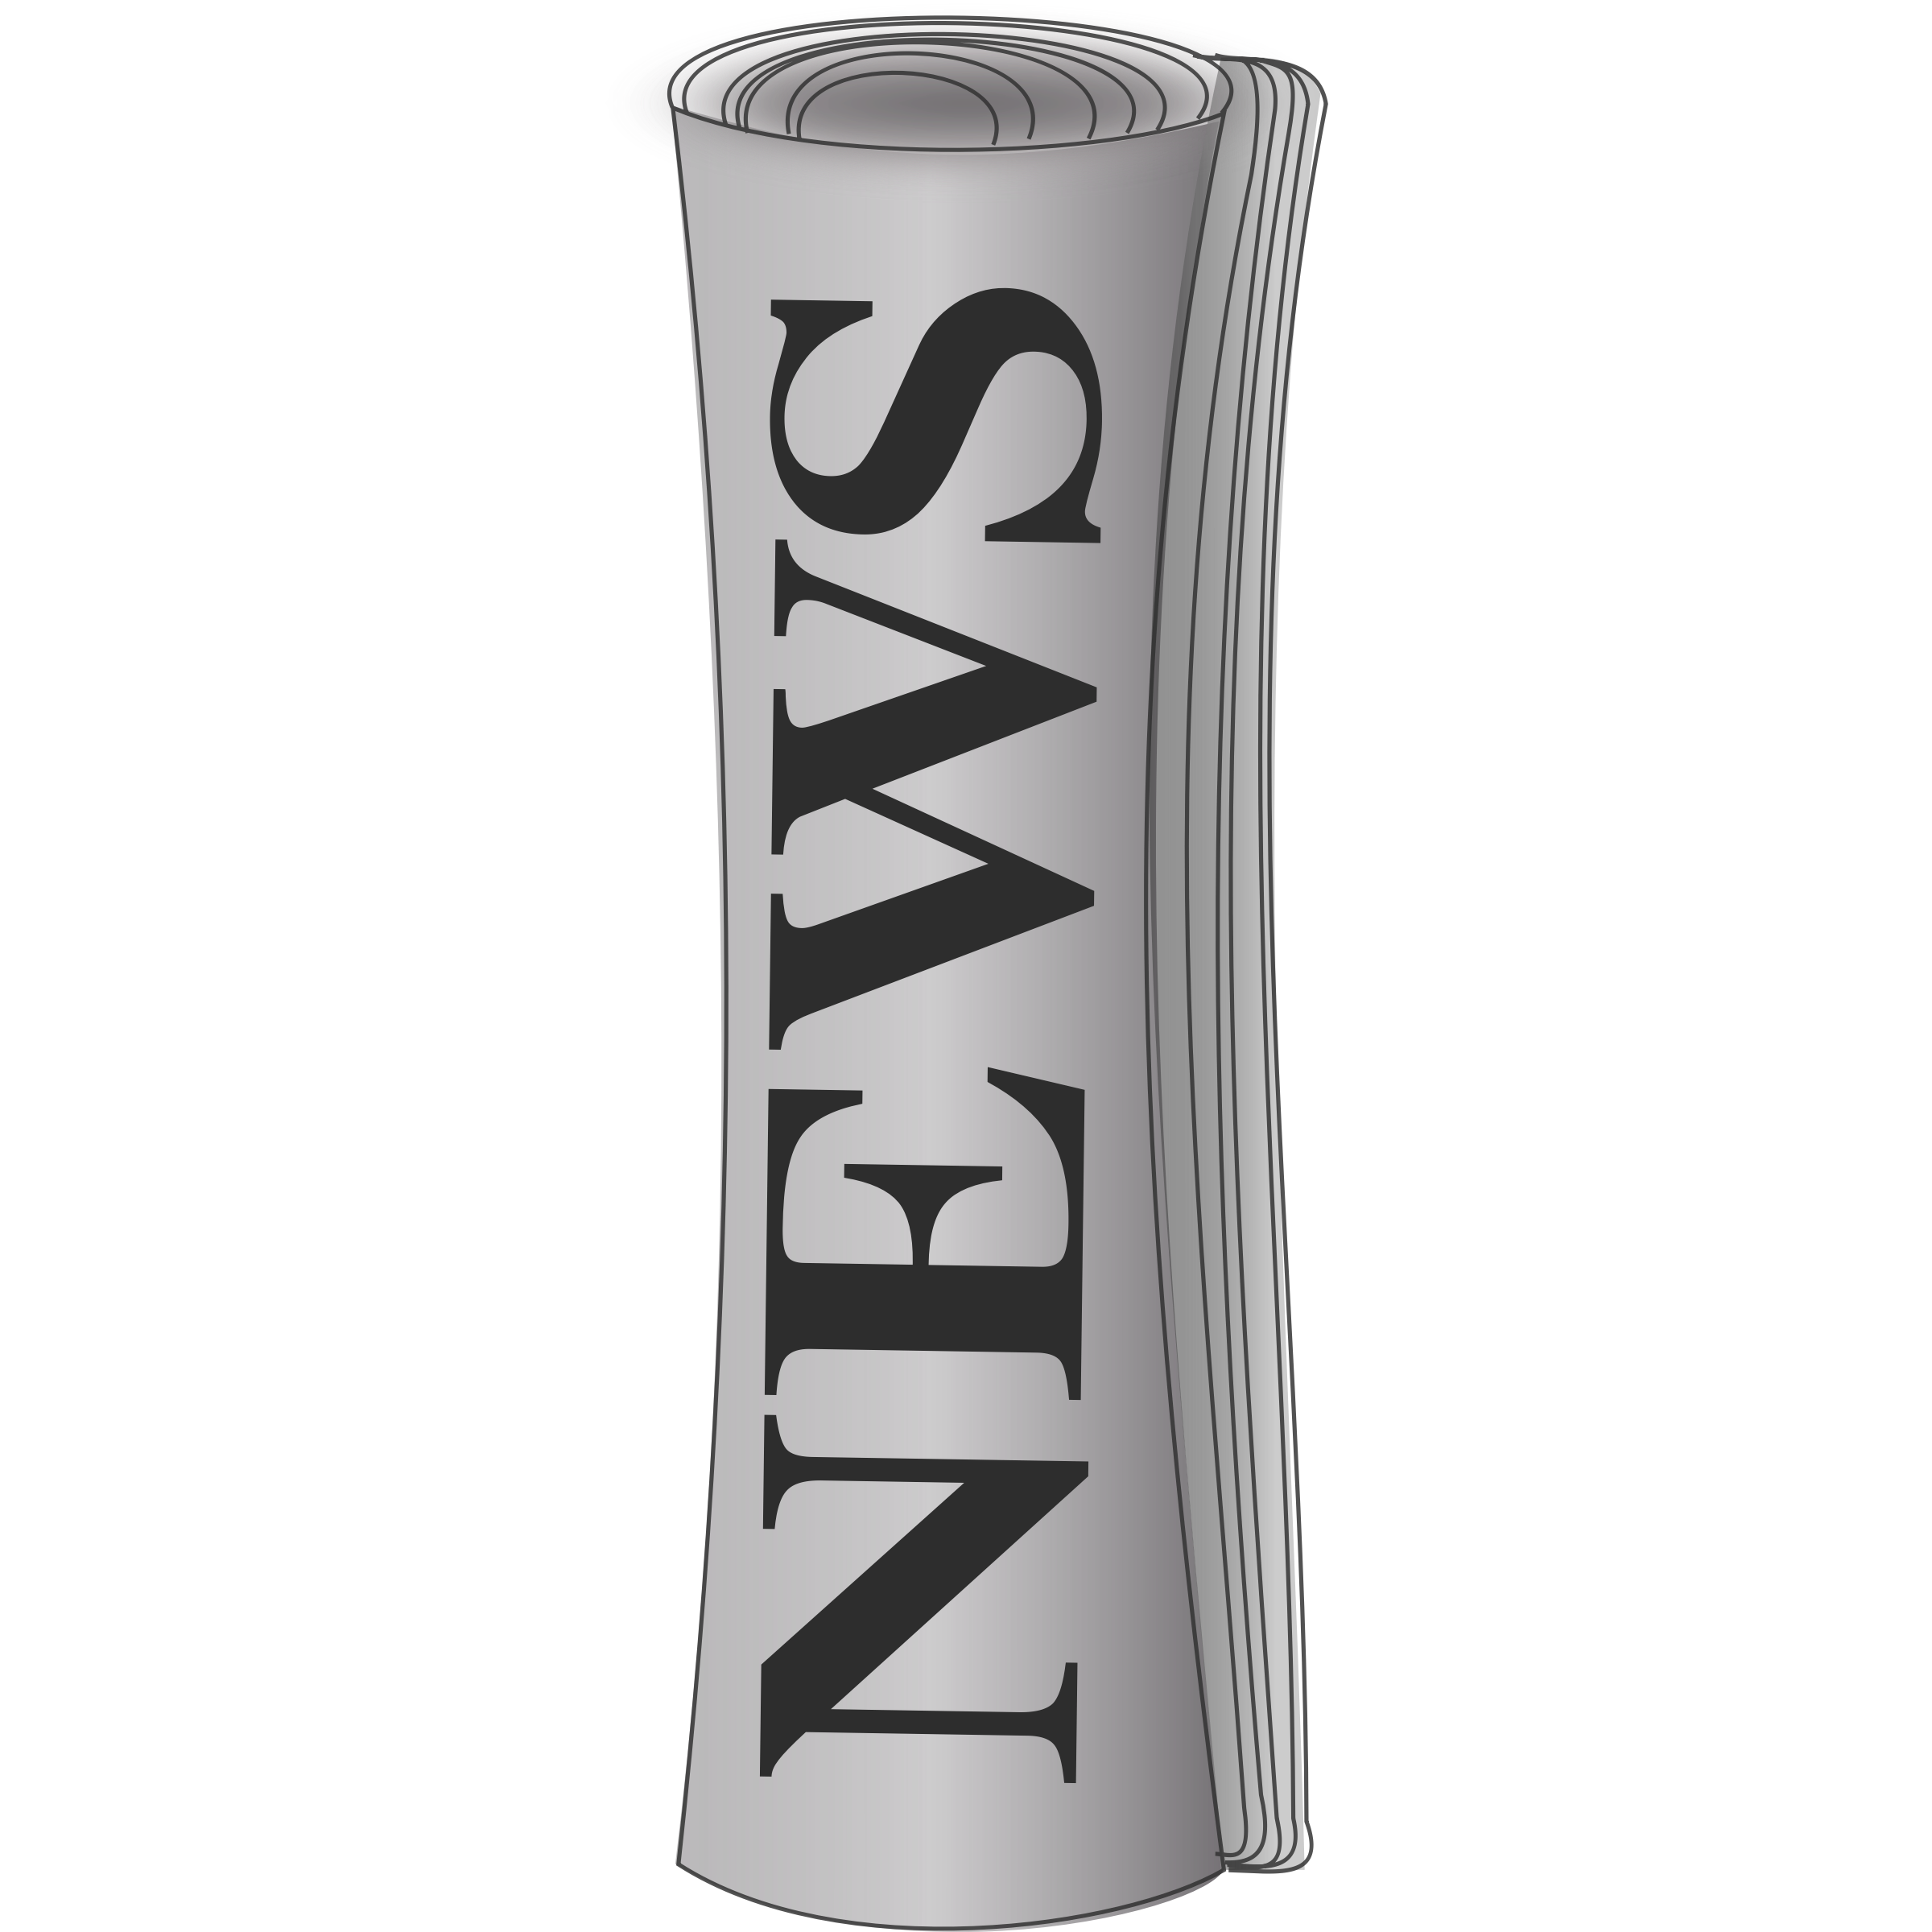 Free clipart rolled up newspaper